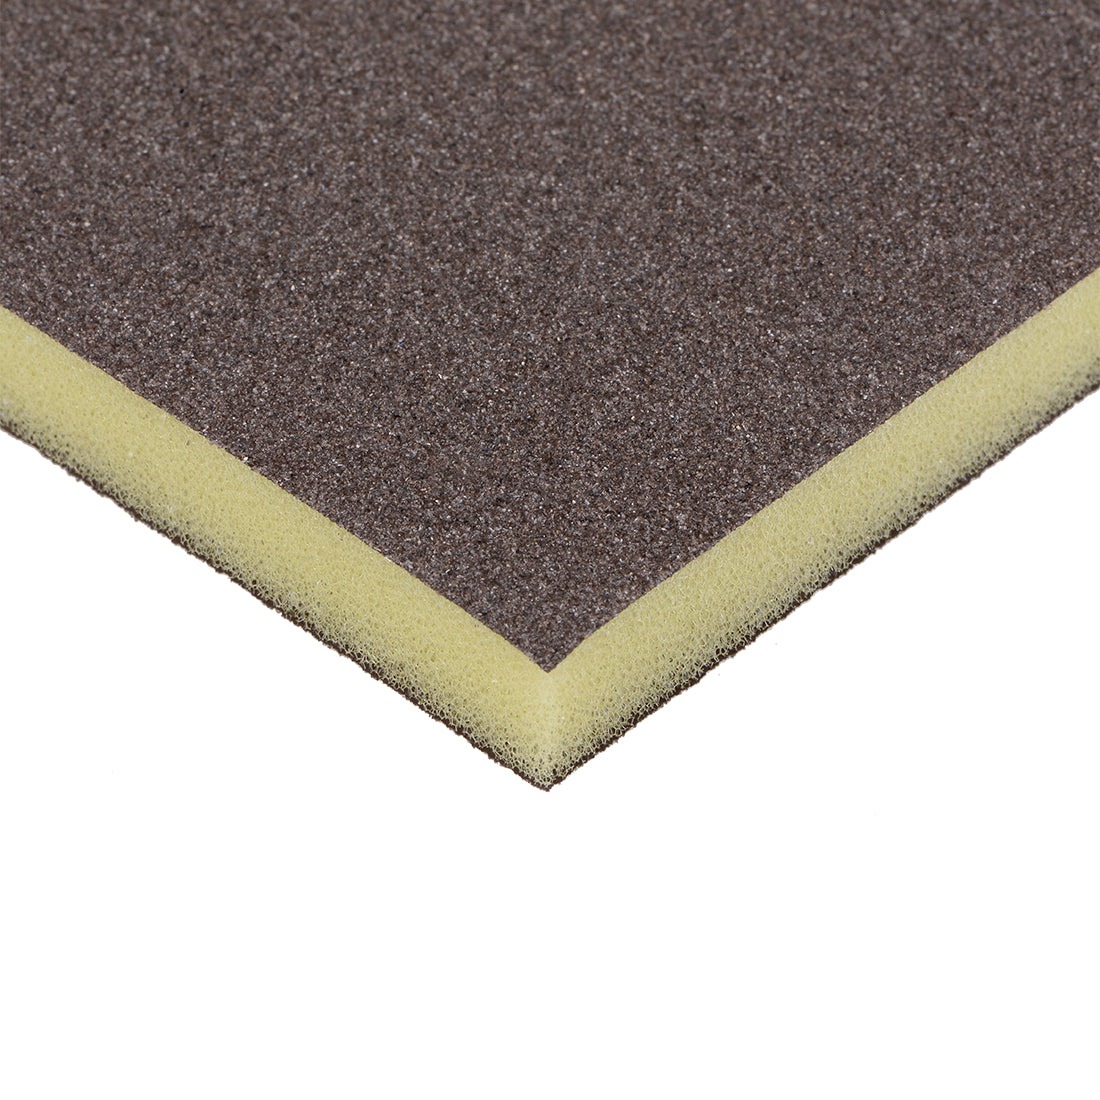 uxcell Uxcell Sanding Sponge 80 Grit Sanding Block Pad 4.7inch x 3.9inch x 0.4inch Brown 3pcs